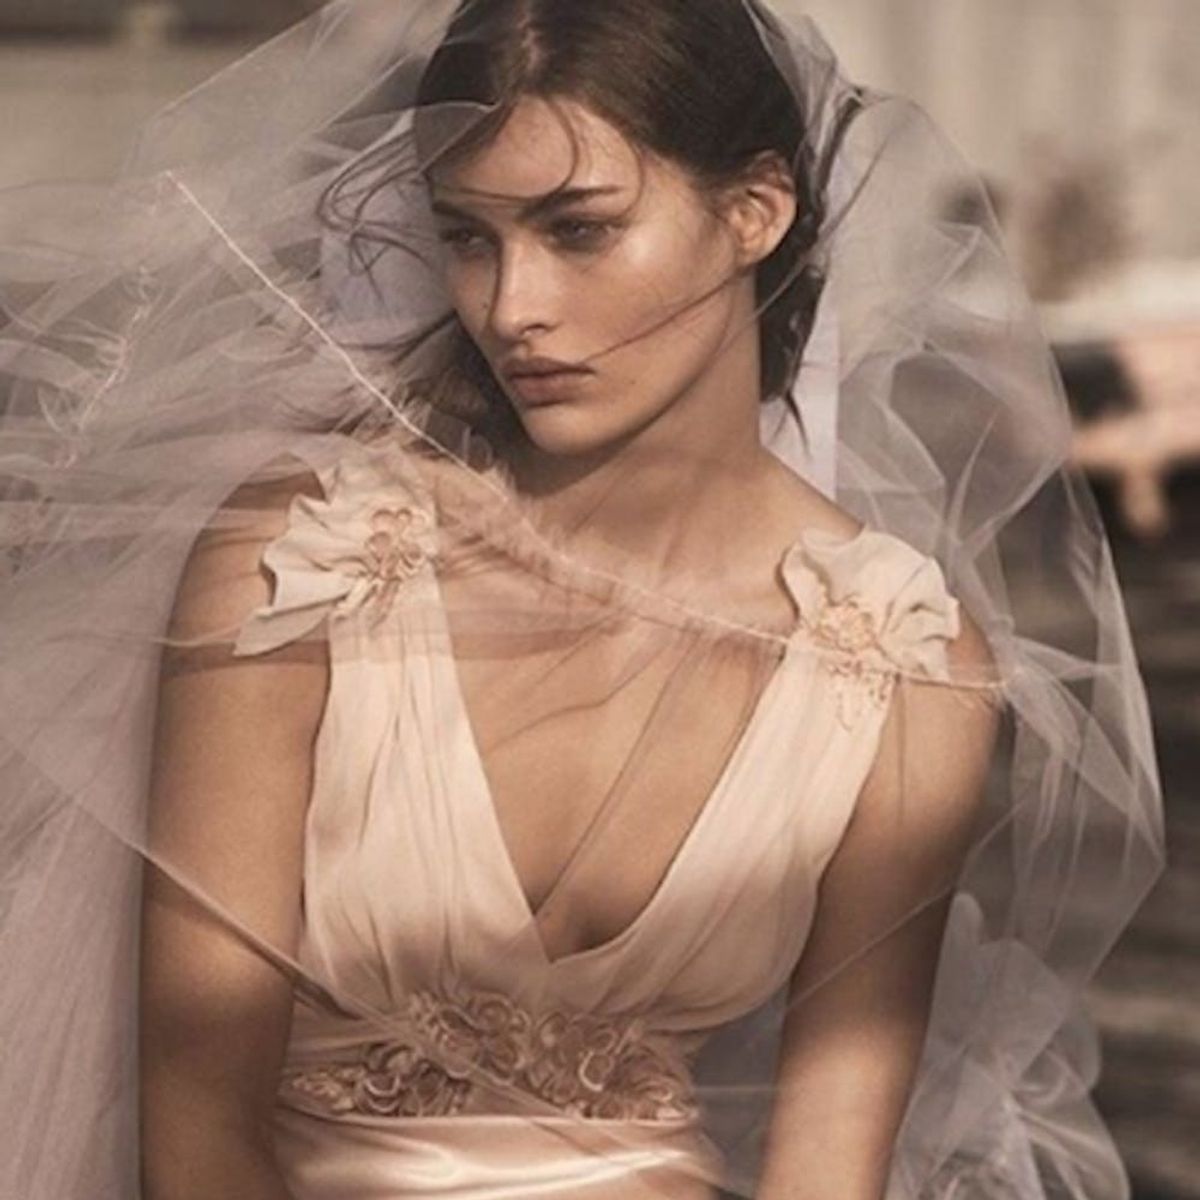 Topshop Is Here to Fill the Void J.Crew Left Behind in Bridal Wear